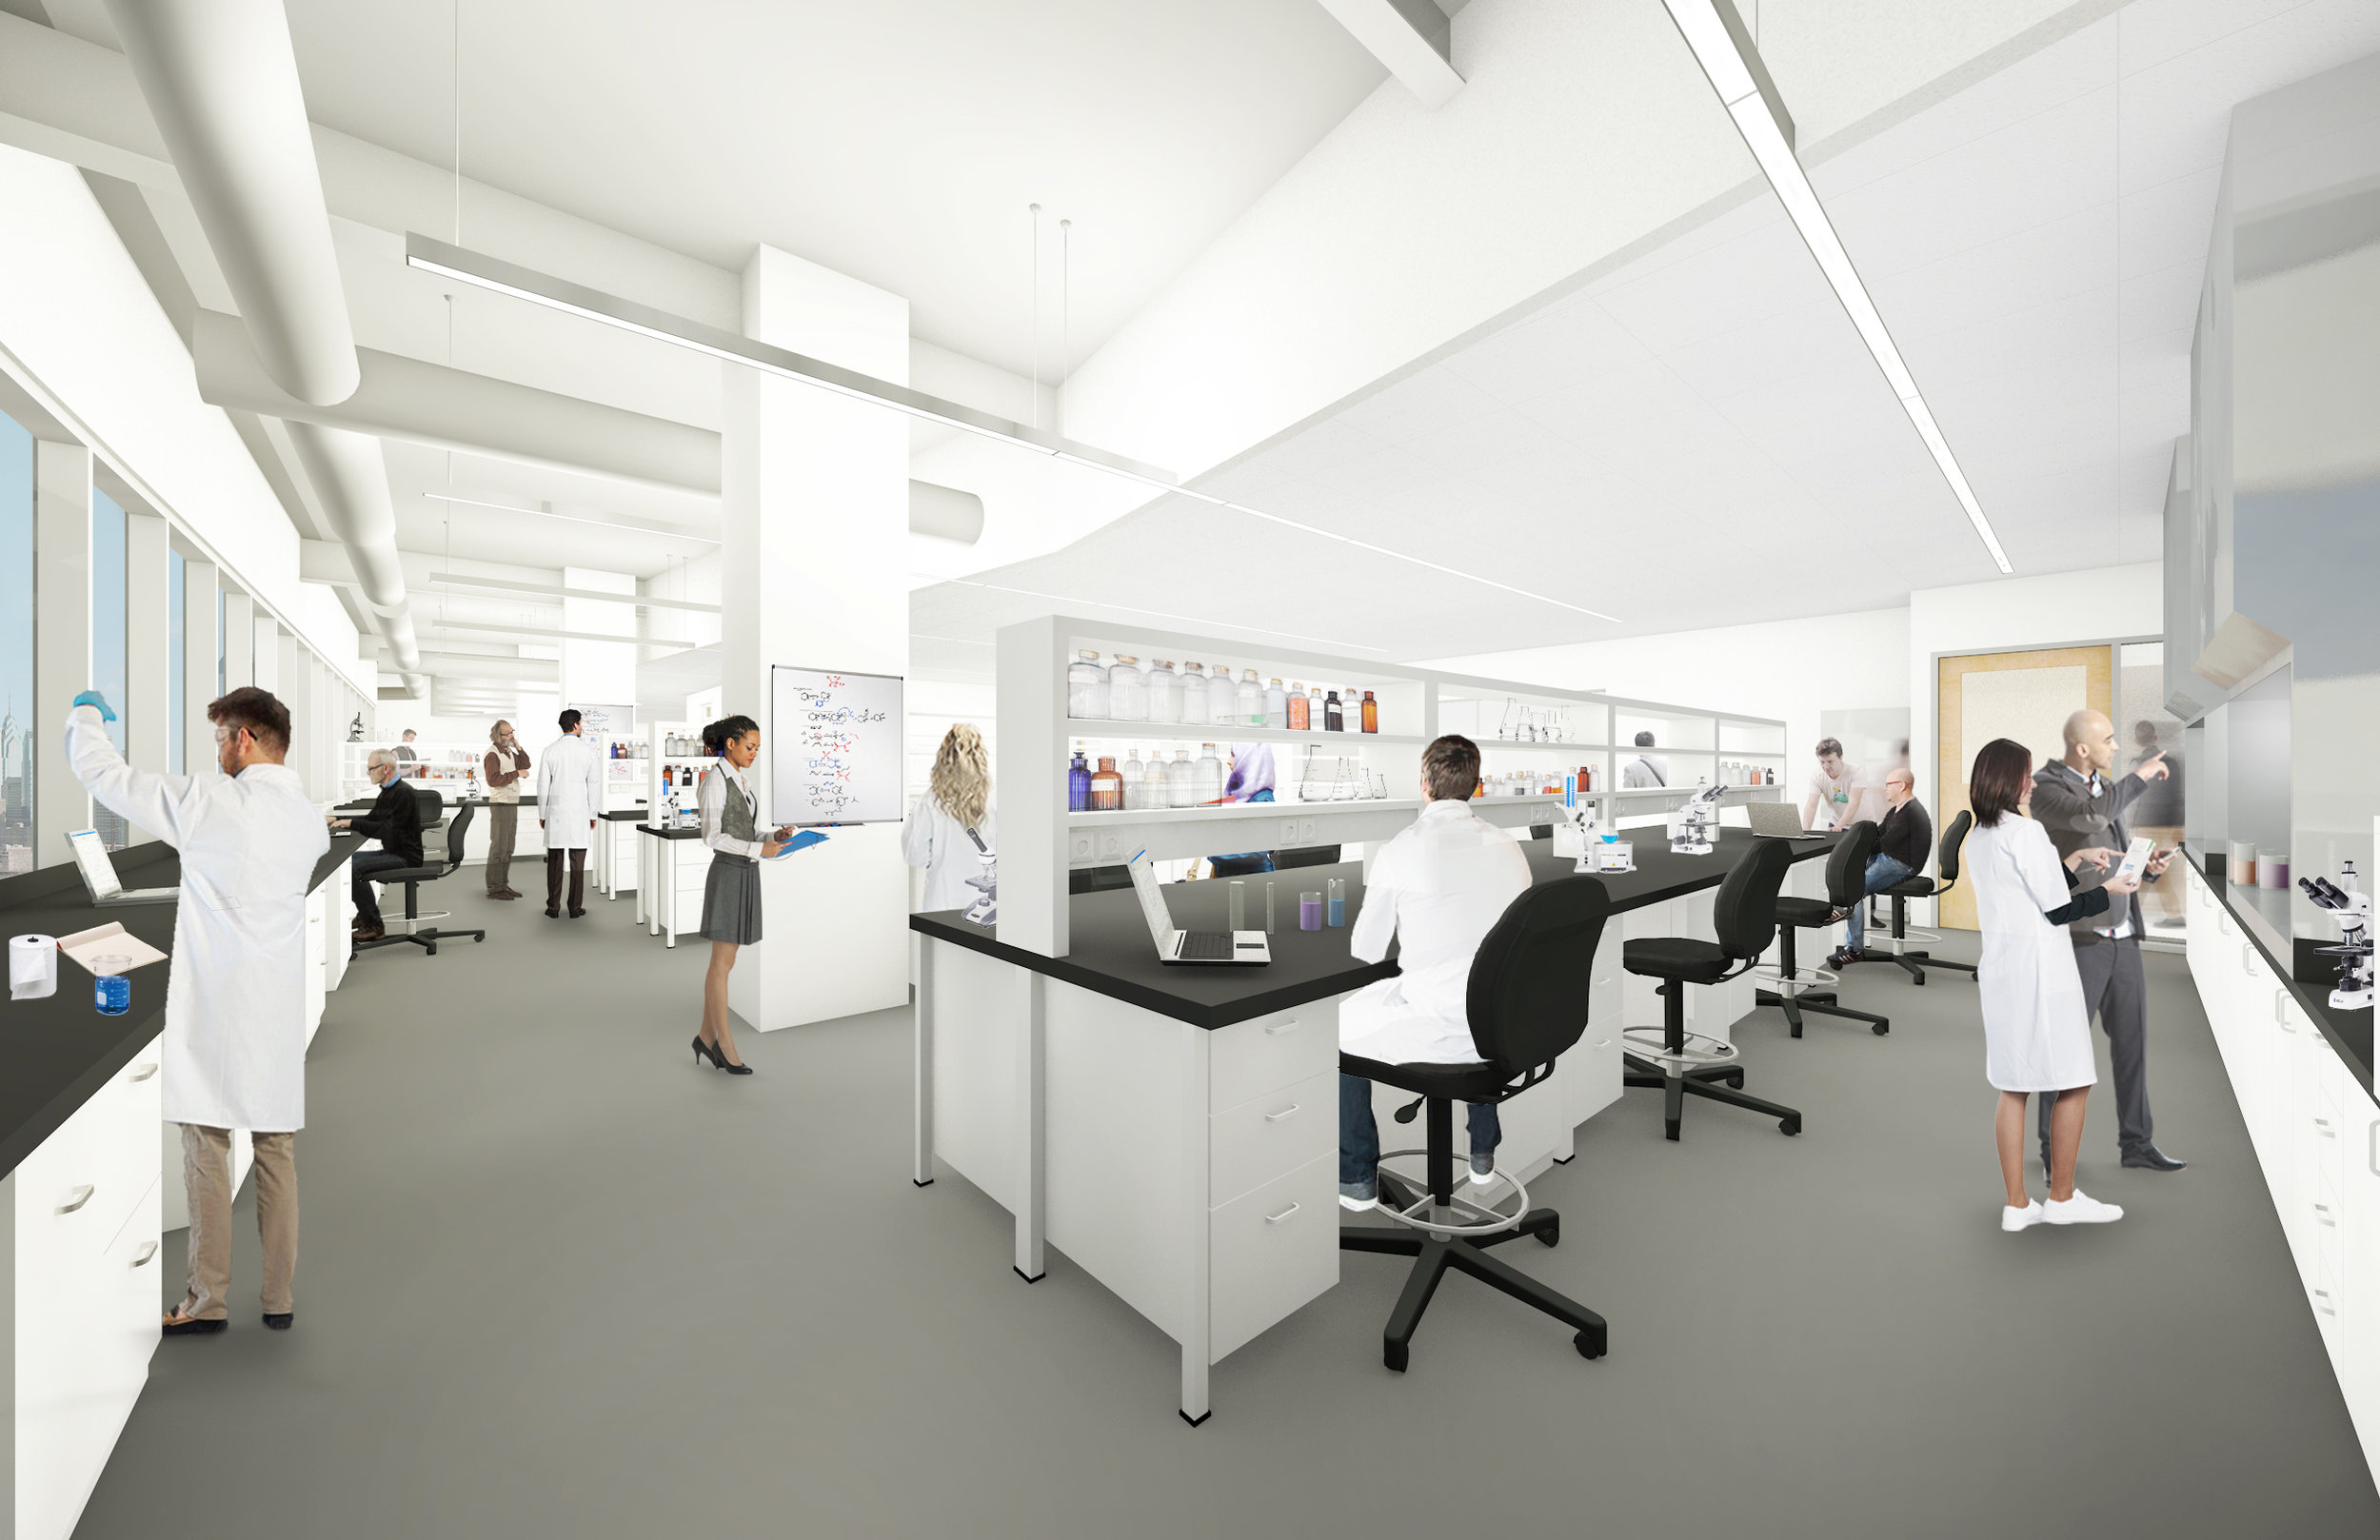 A rendering of our upcoming lab space.